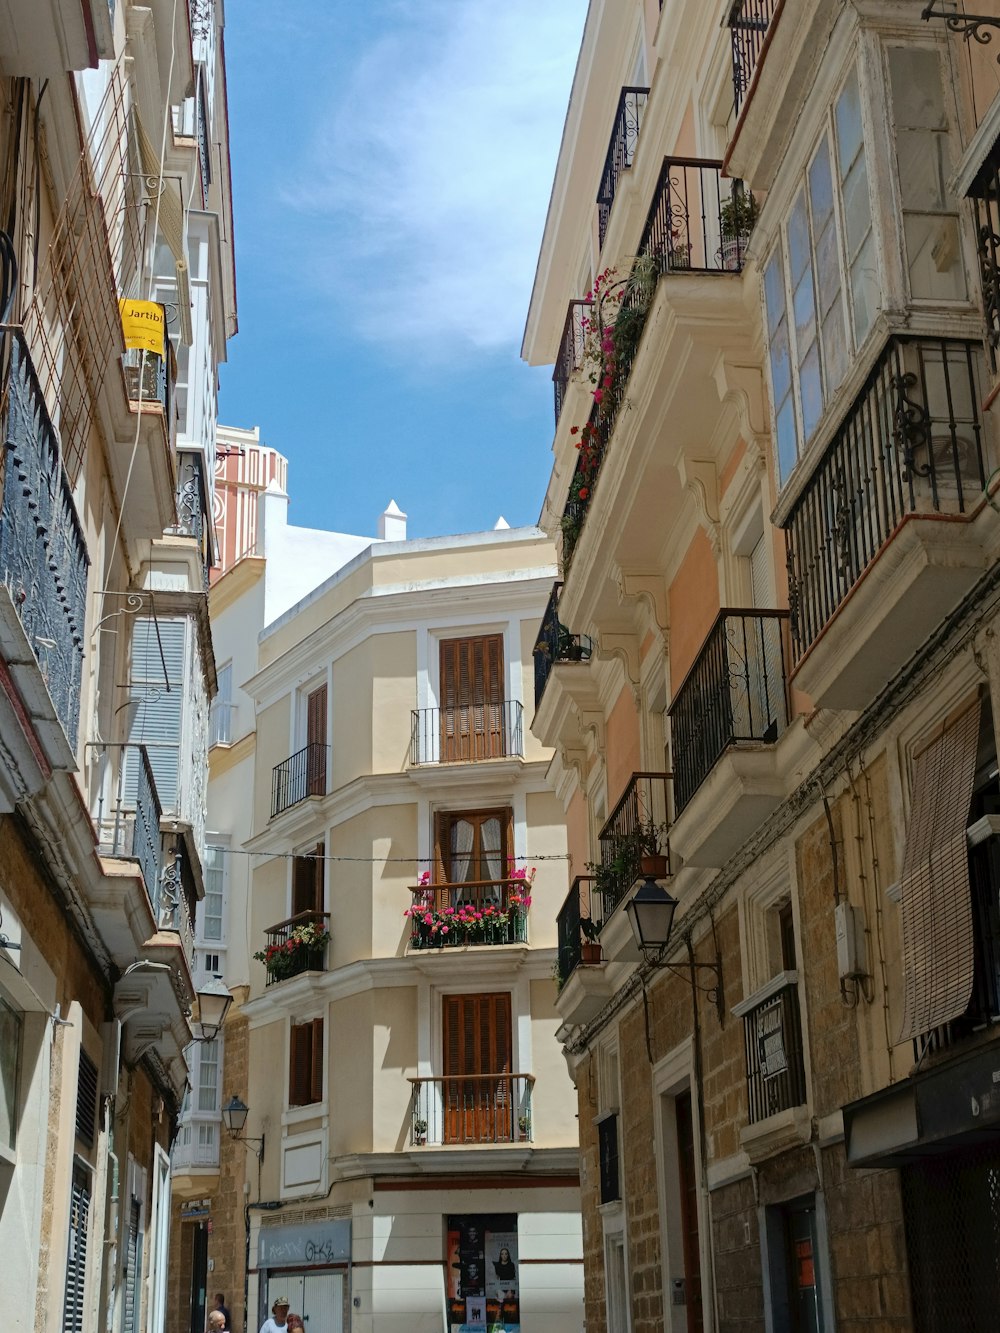 a narrow city street with people walking down it